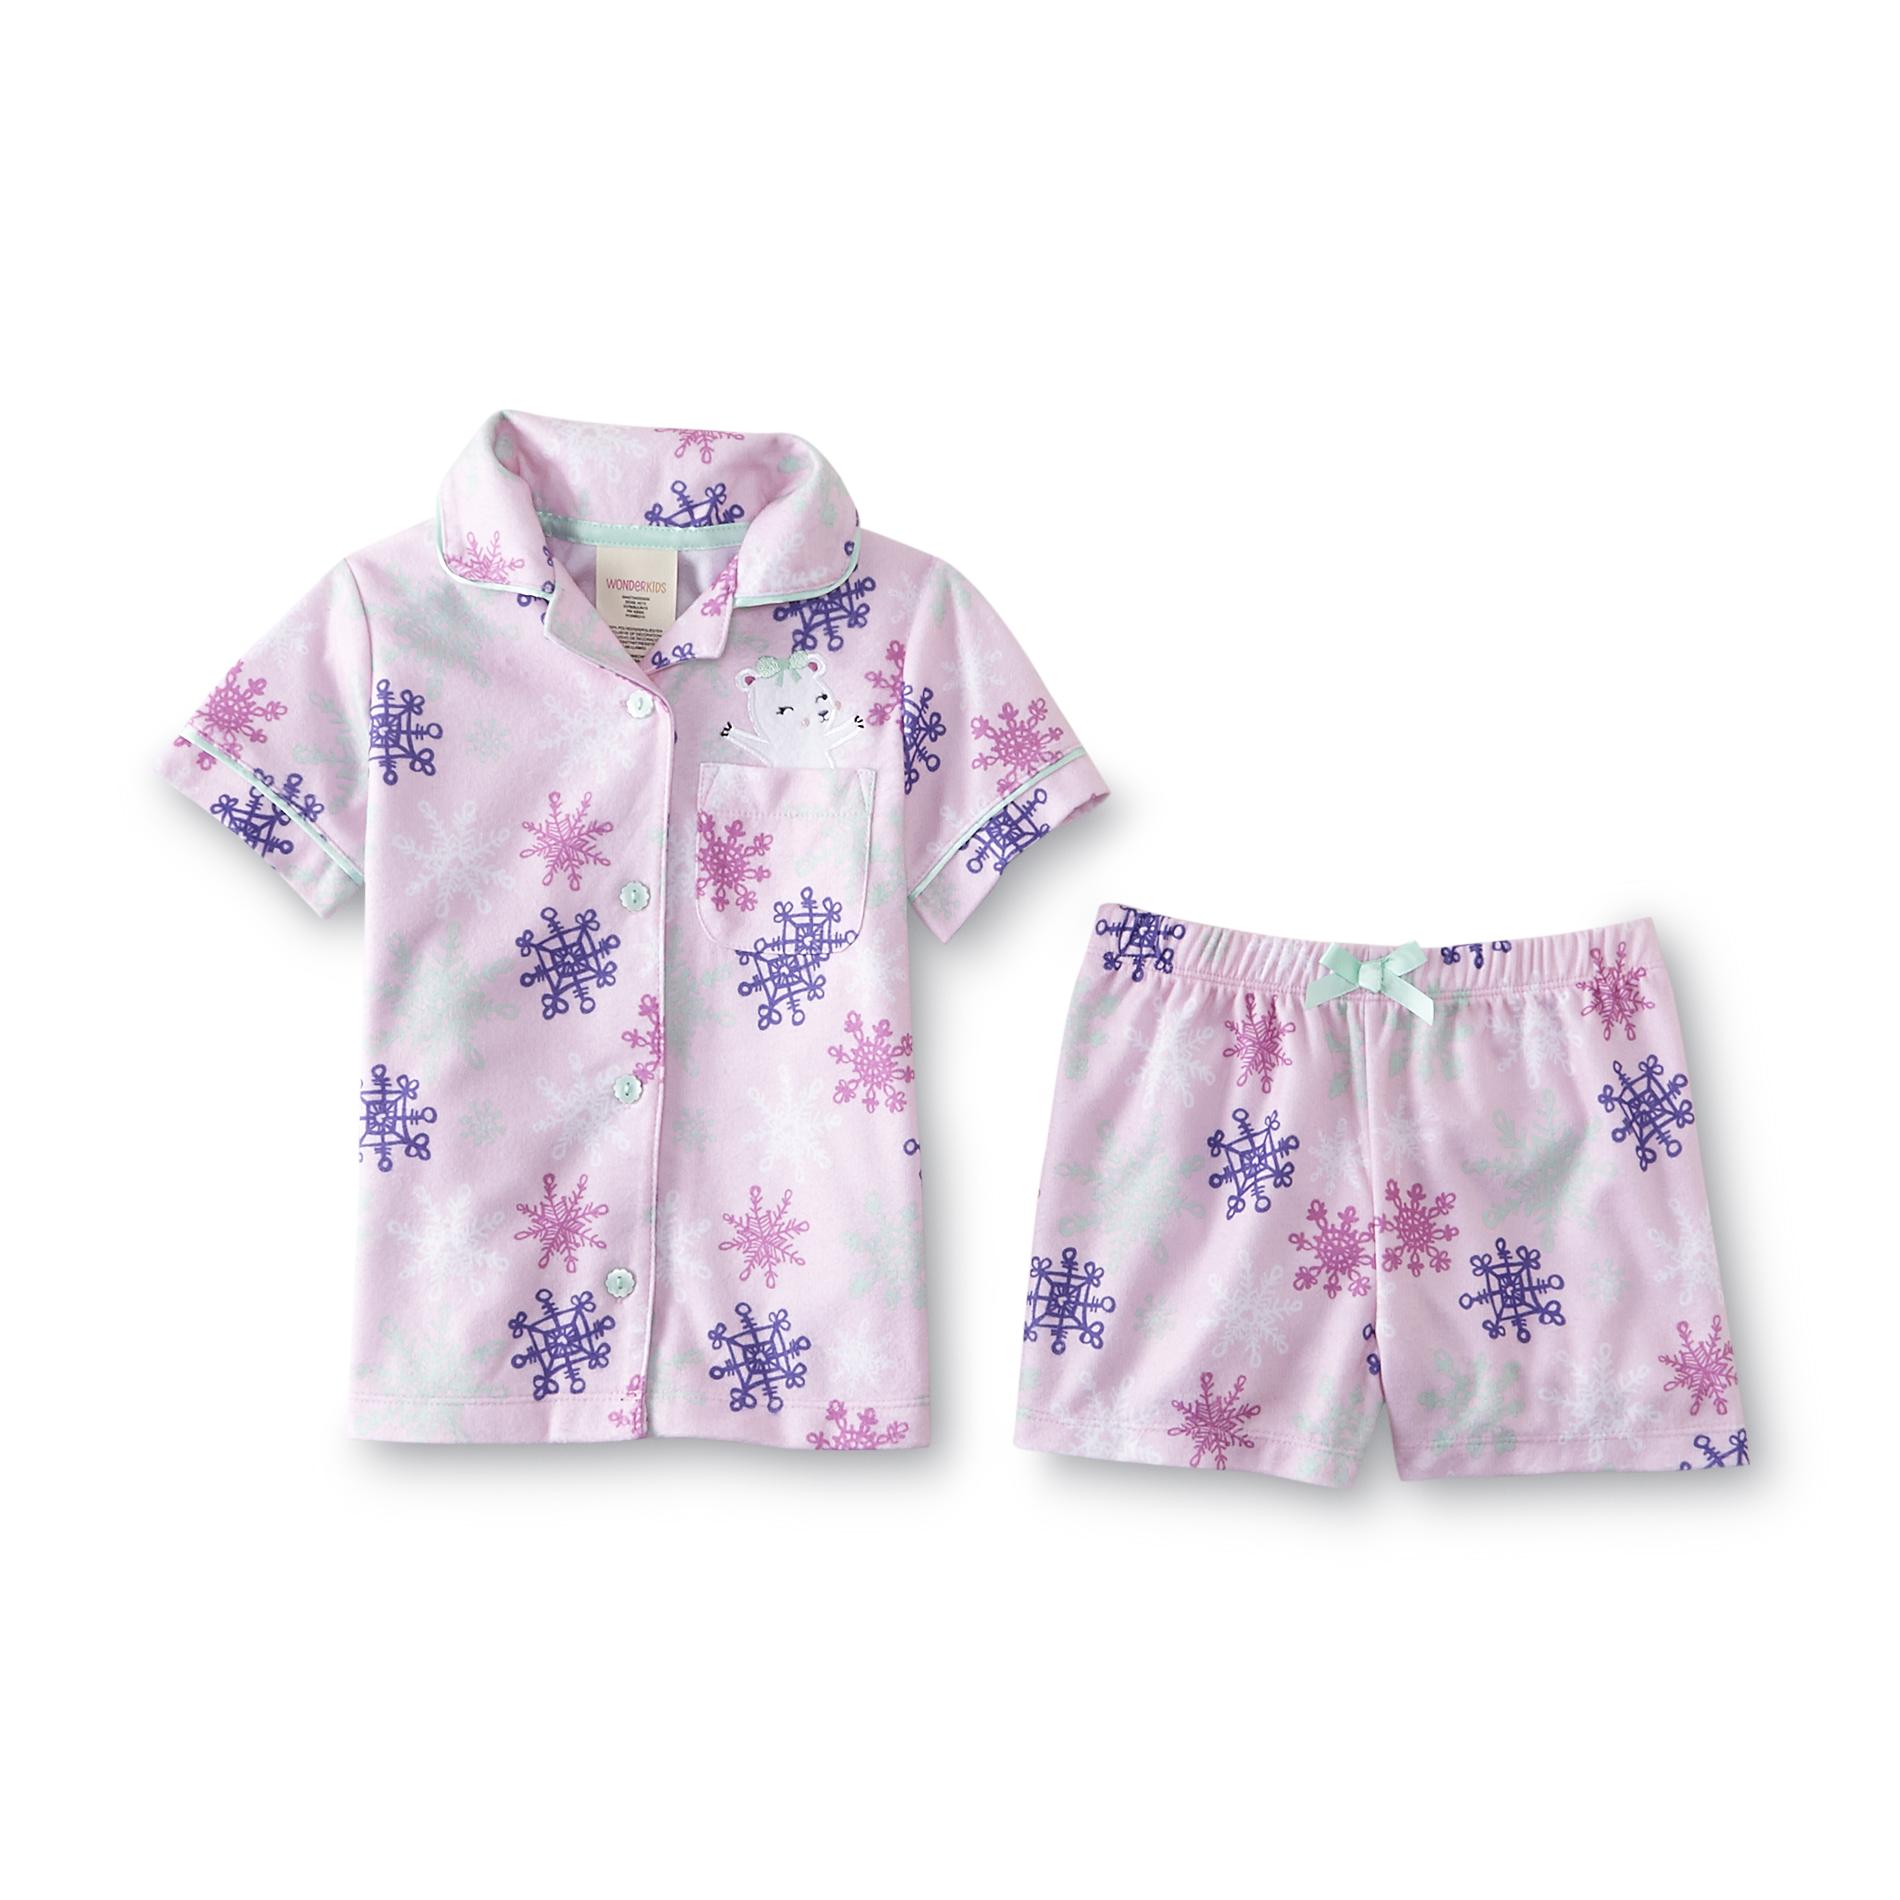 WonderKids Infant & Toddler Girl's Flannel Pajama Top & Shorts - Snowflakes